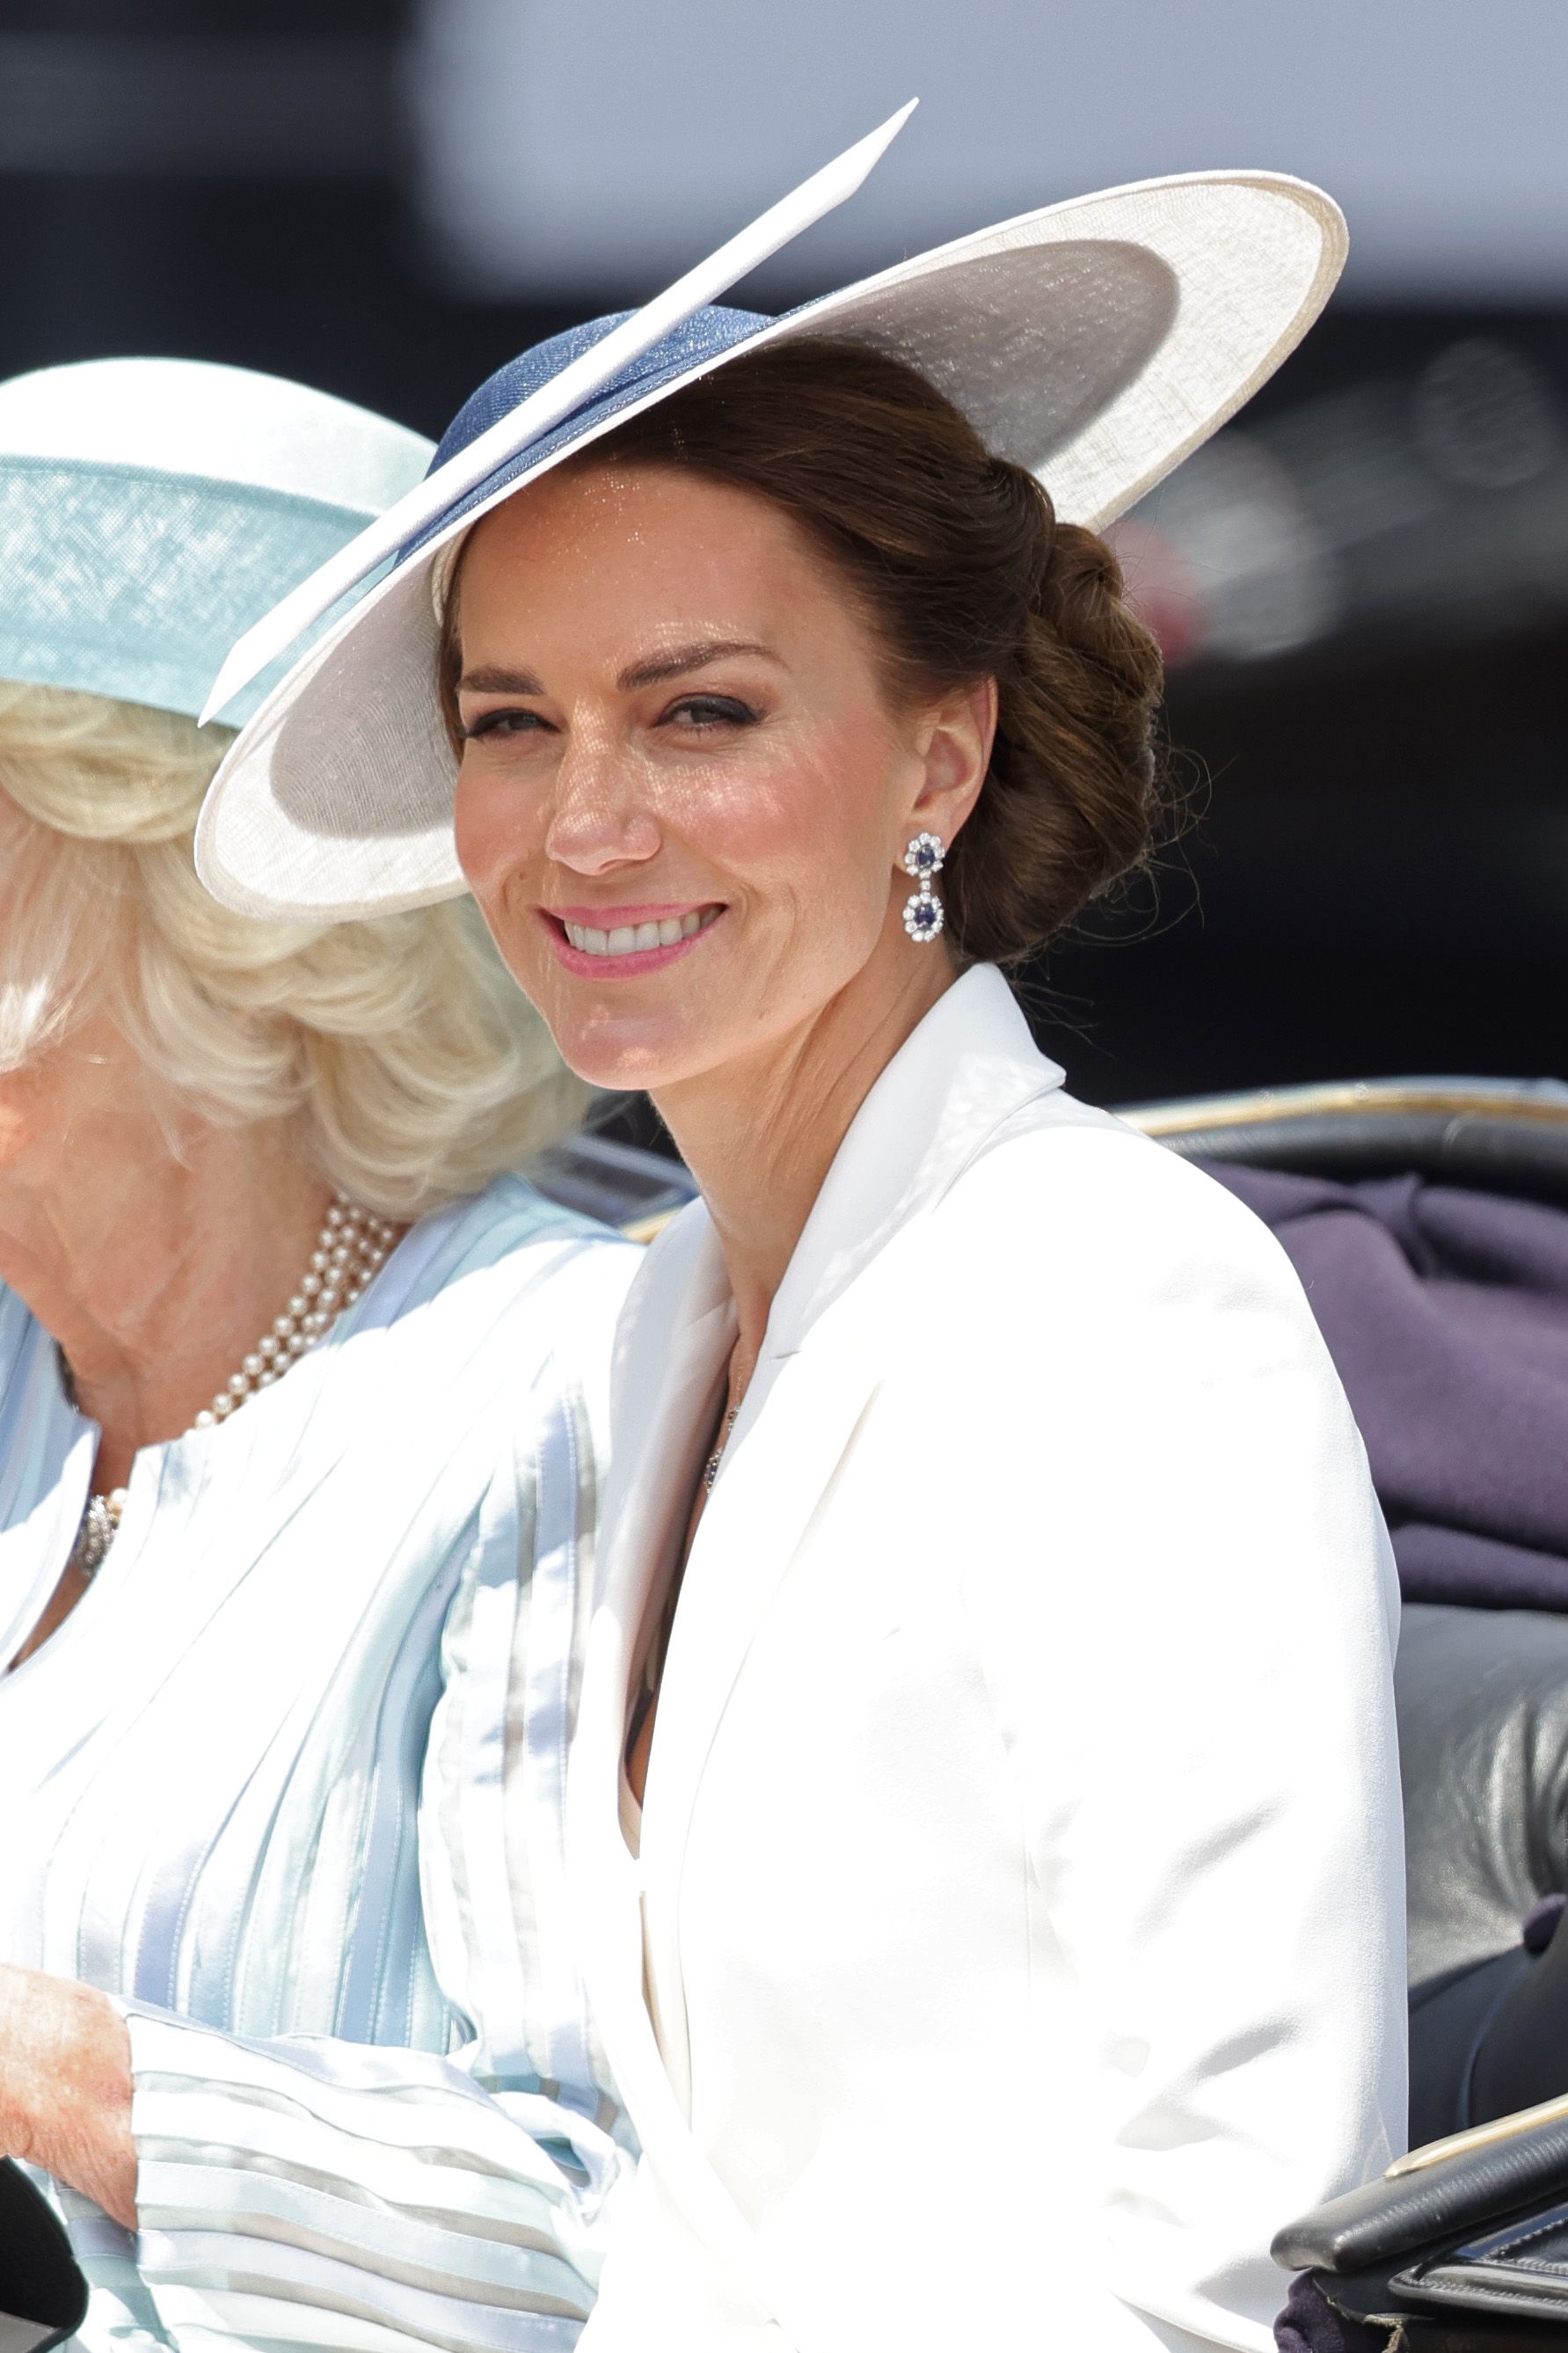 Kate Middleton changed these diamond earrings that belonged to Diana   Marie Claire UK